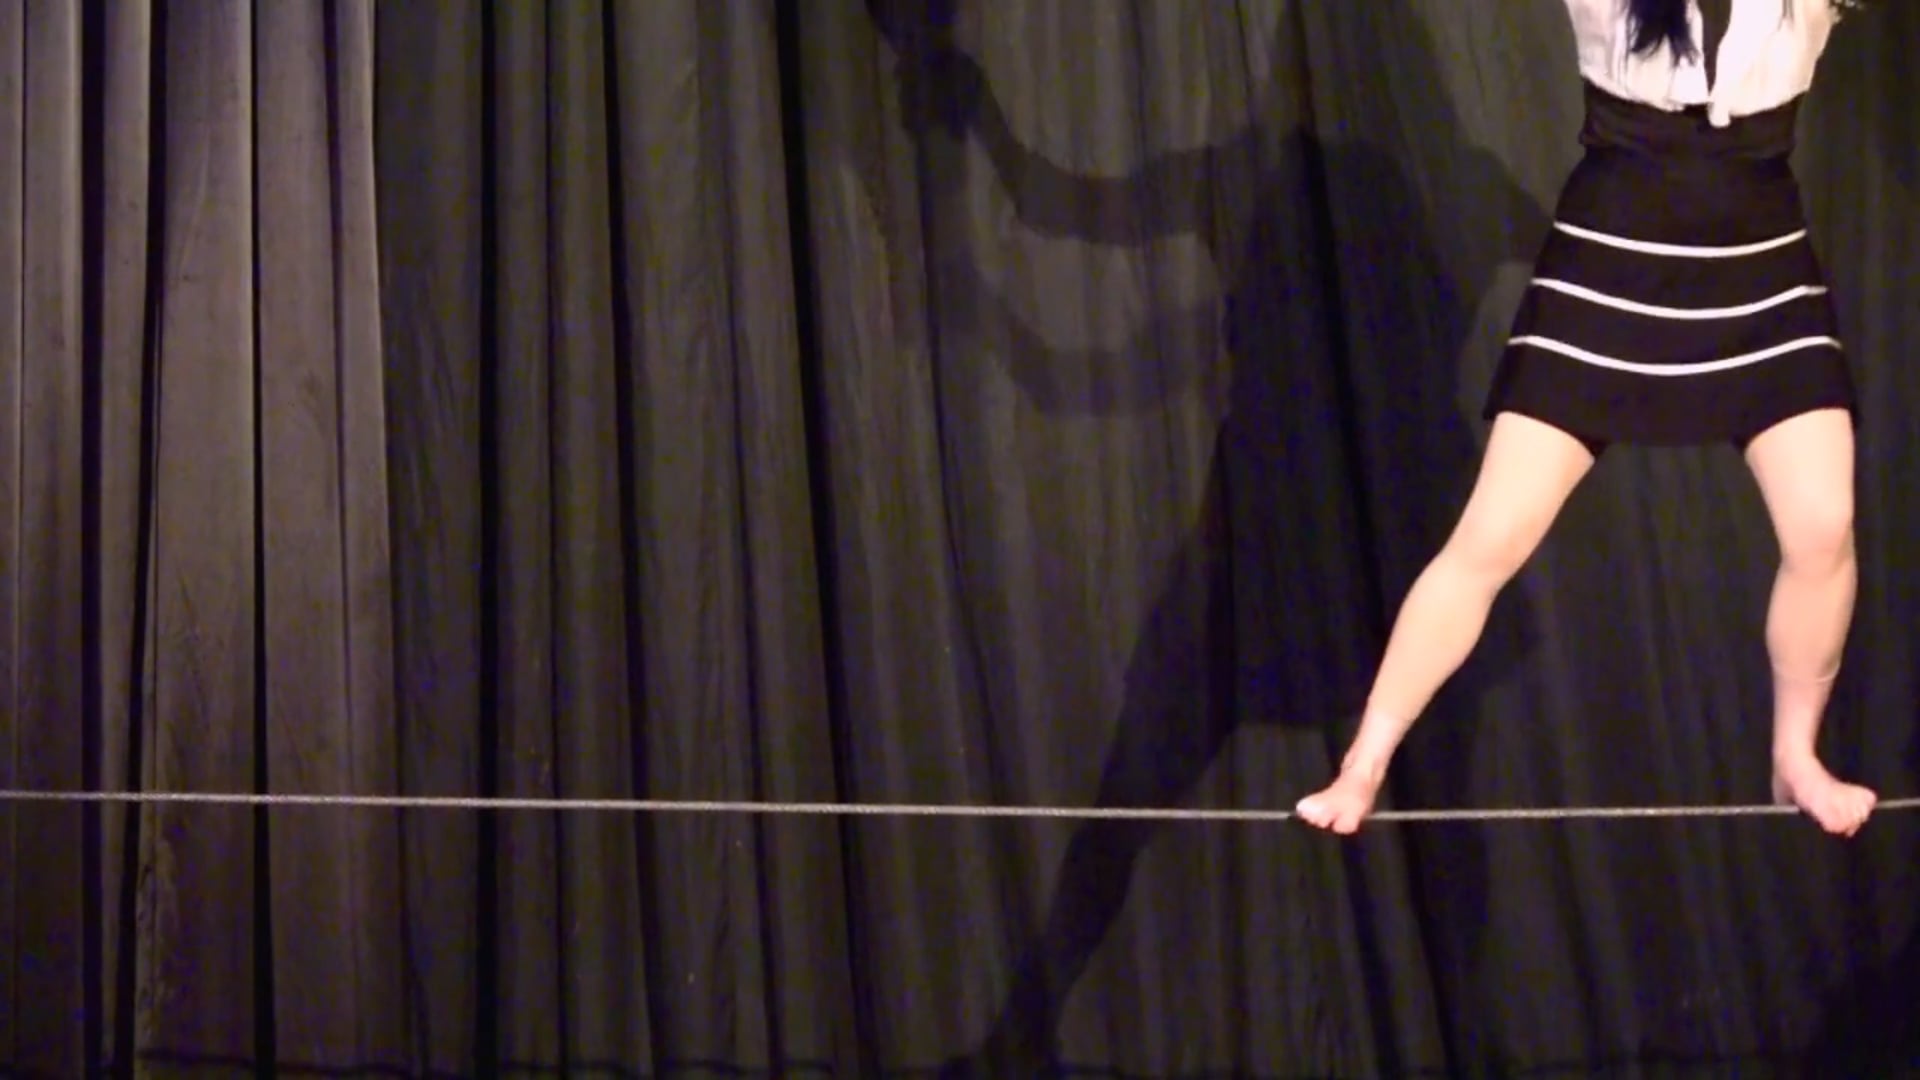 Promotional video thumbnail 1 for Erin the Tightwire Dancer and Aerialist